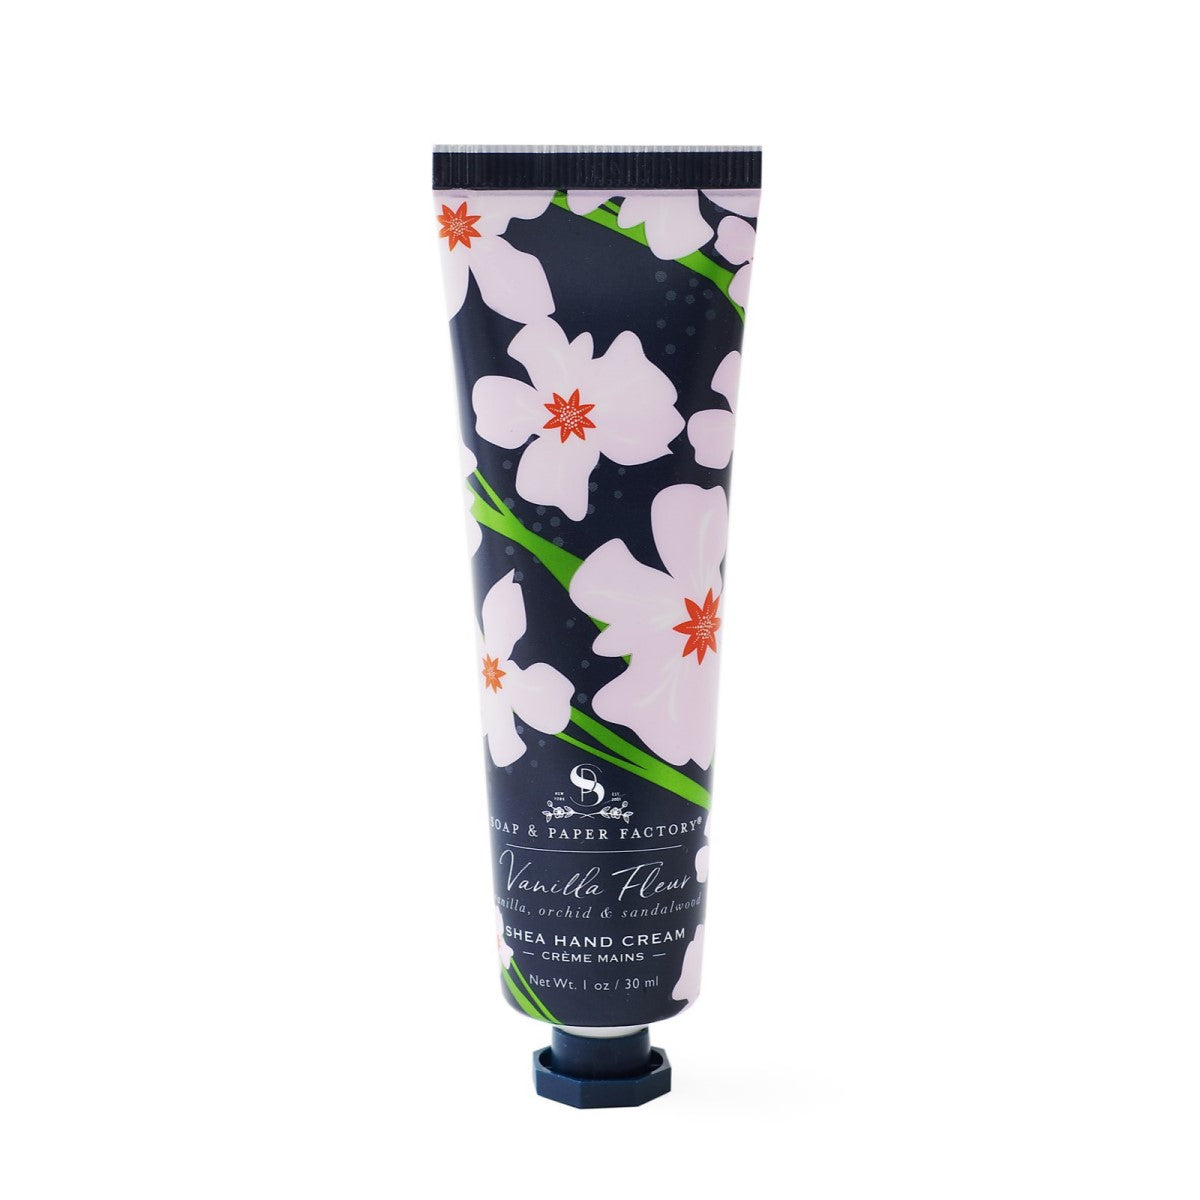 Primary Image of Vanilla Fleur Shea Butter Hand Creme